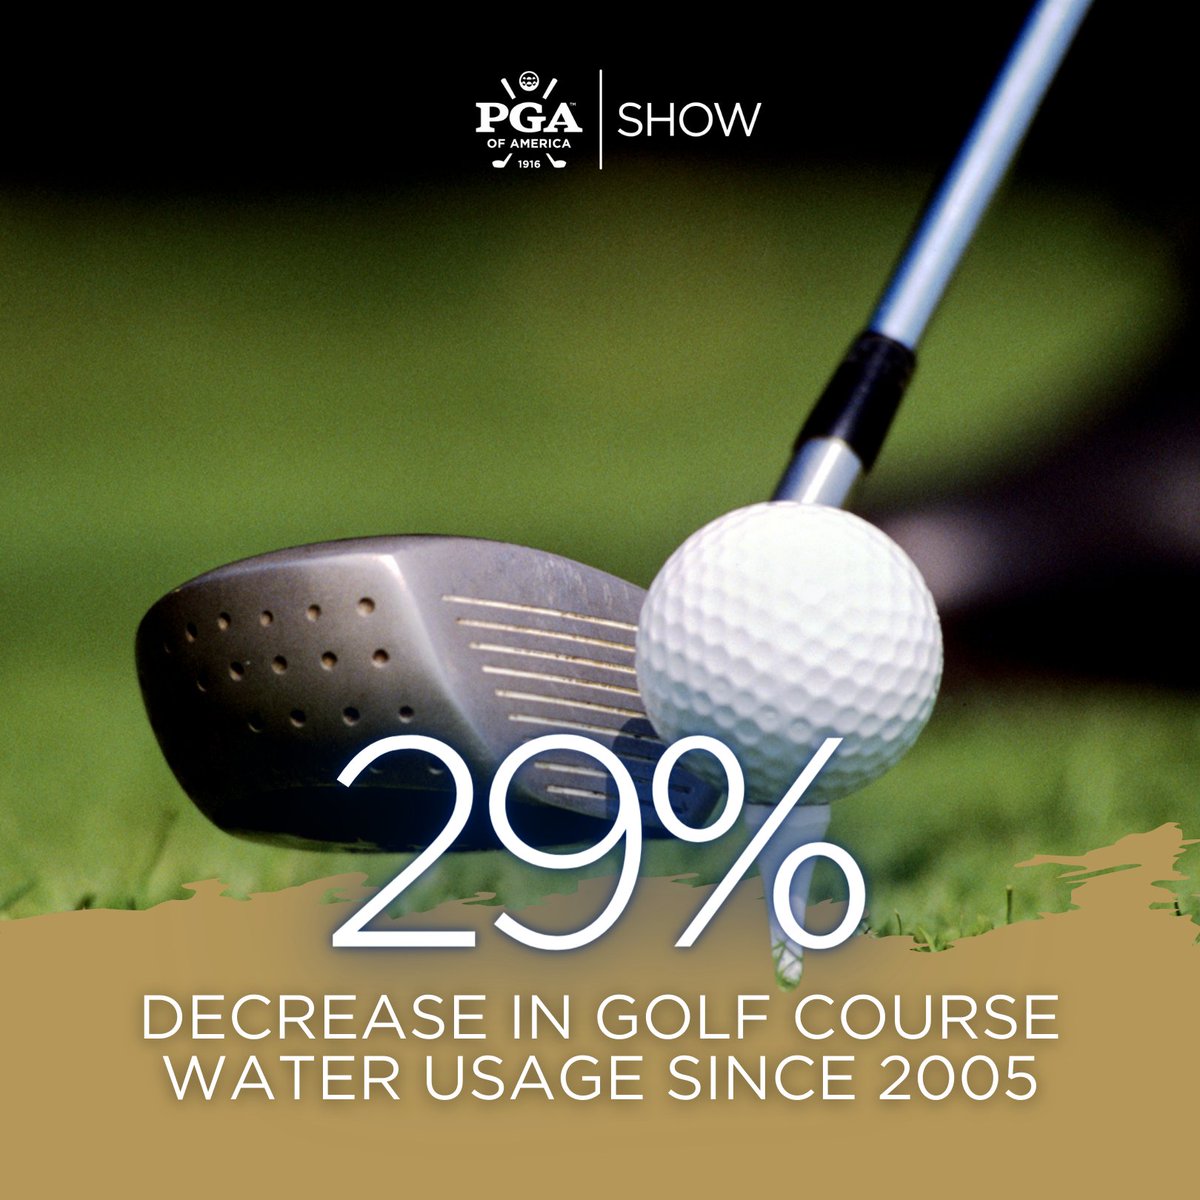 This #EarthDay, we're shouting out golf for doing its part! From providing green space to advancing water conservation efforts.

🌎 Habitat for plant and animal species
🌎 Total irrigated acre reduction of 11.5%

🗒️ Get the facts from @golfcoalition: bit.ly/3J0vuSL